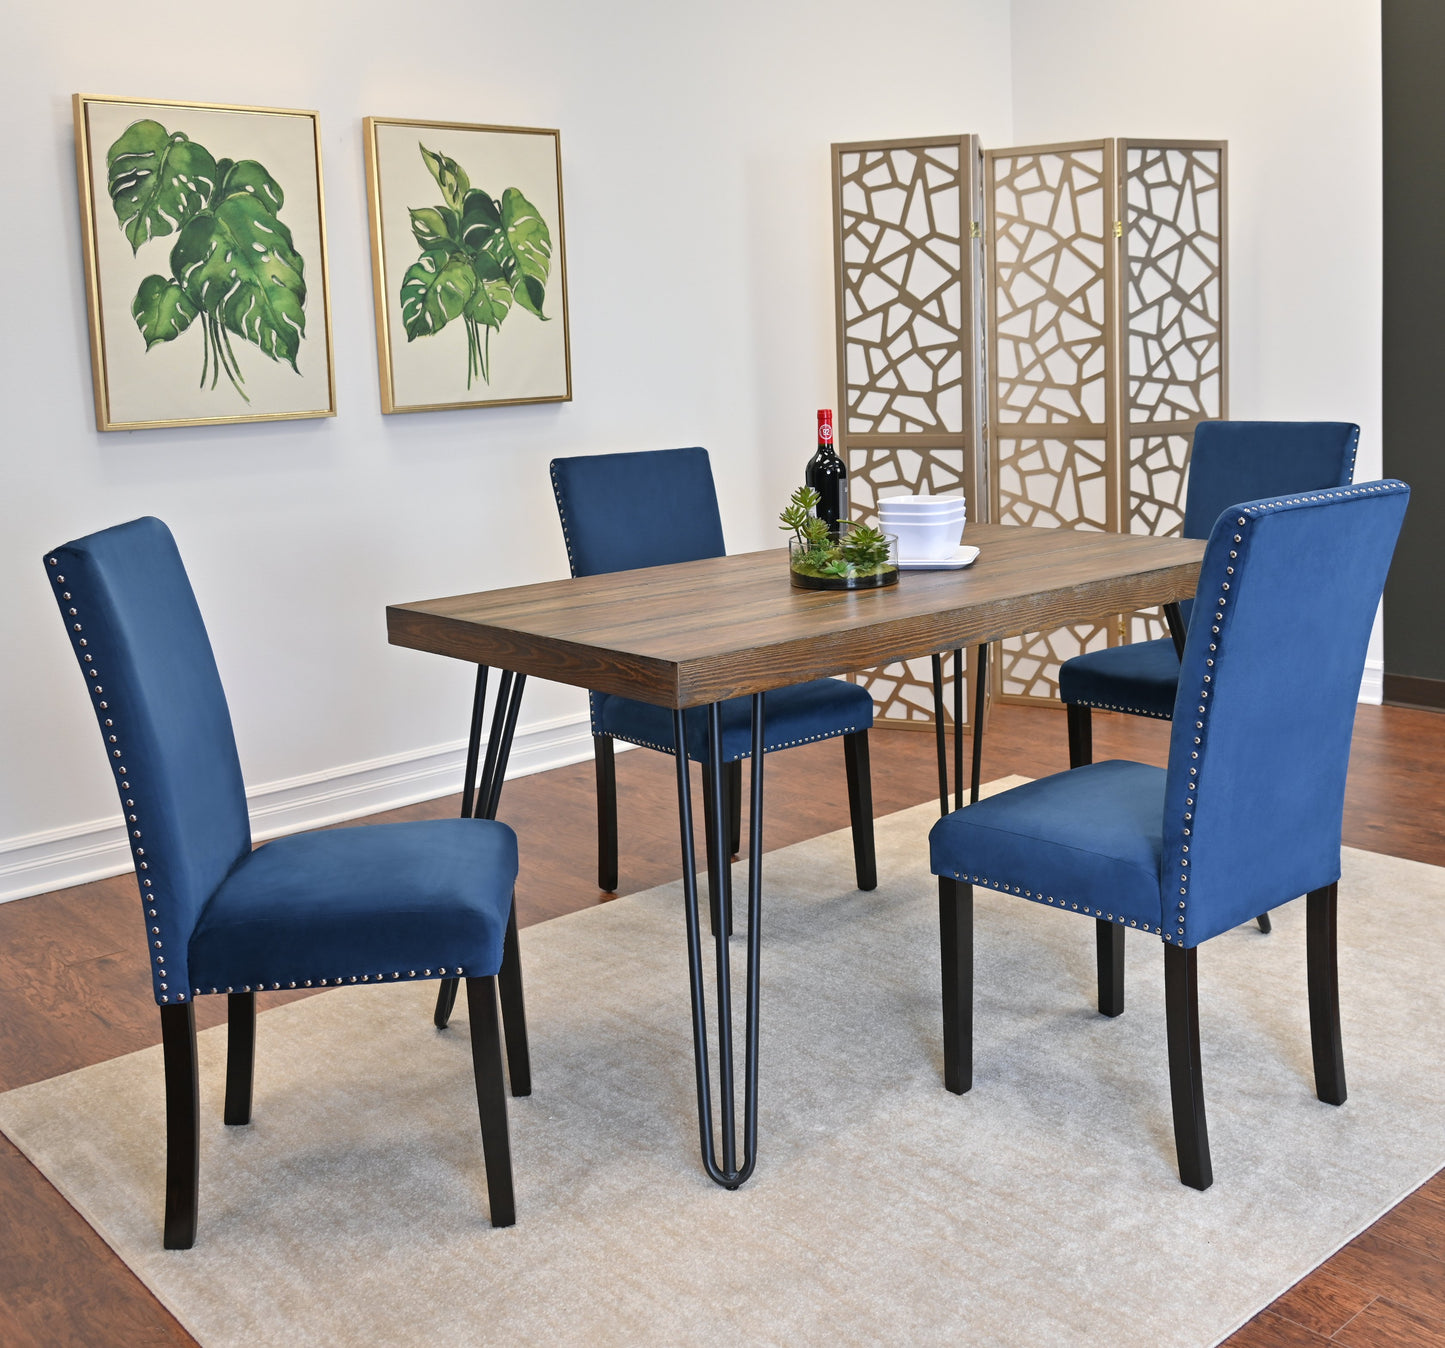 Ashzo 5-Piece Dining Set, Hairpin Dining Table with 4 Chairs, 3 Color Options